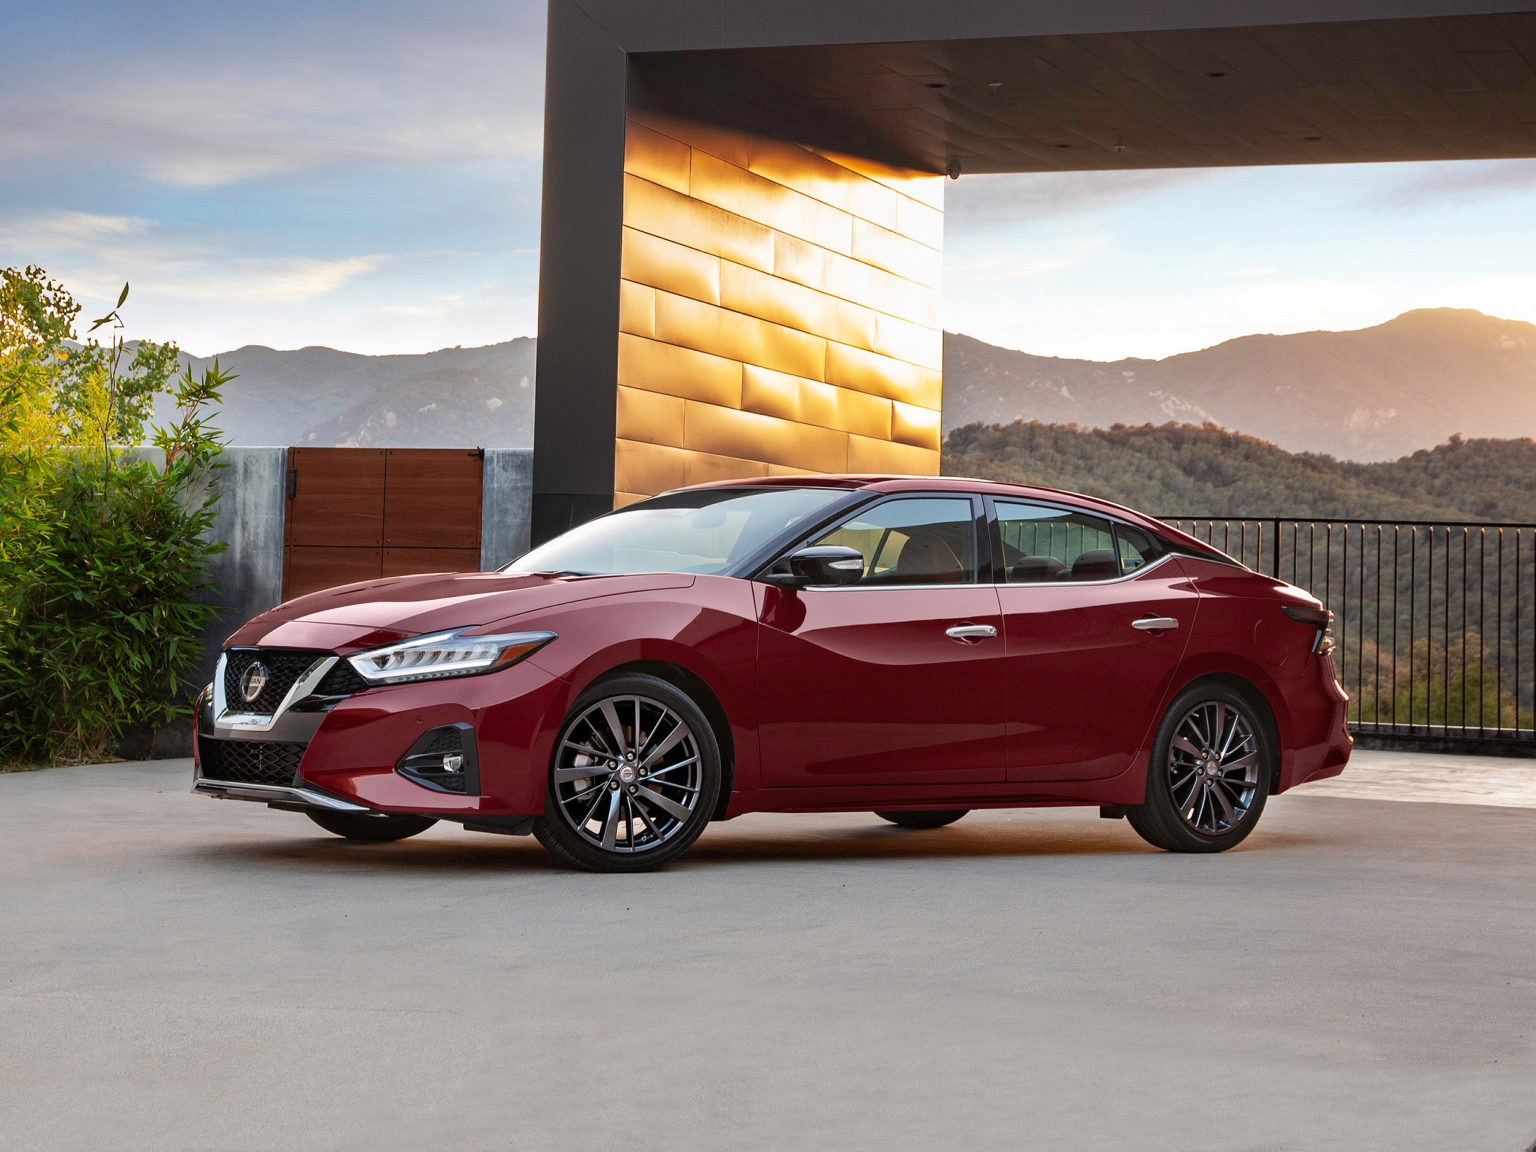 The Nissan Maxima is one of the cheapest cars to insure in the U.S.